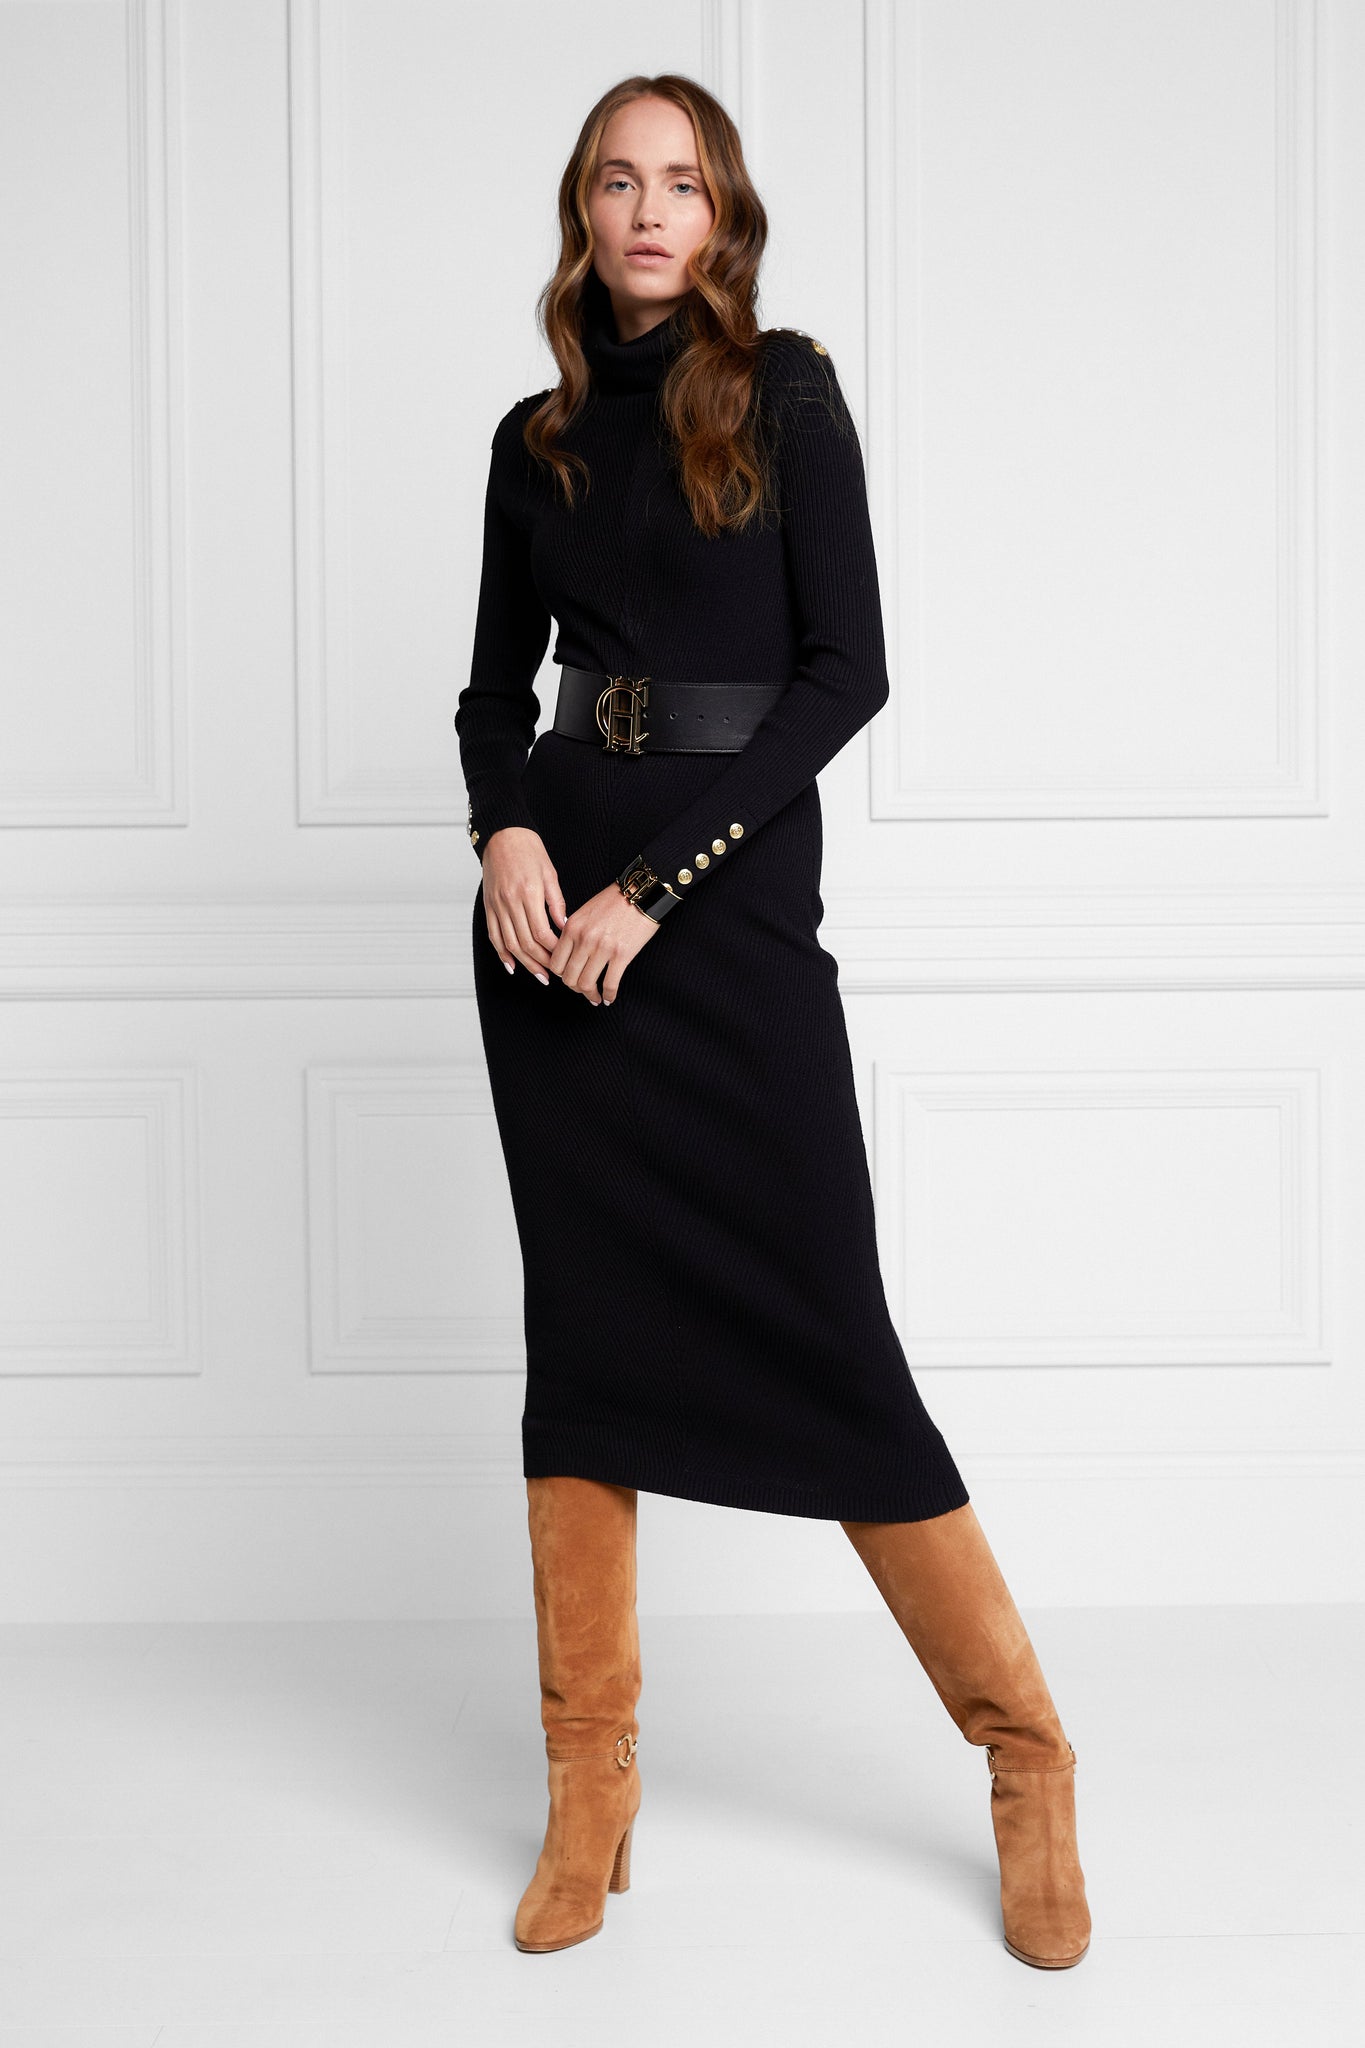 womens black knitted roll neck midi dress with gold buttons on cuffs and shoulders with black belt and tan heeled knee boots